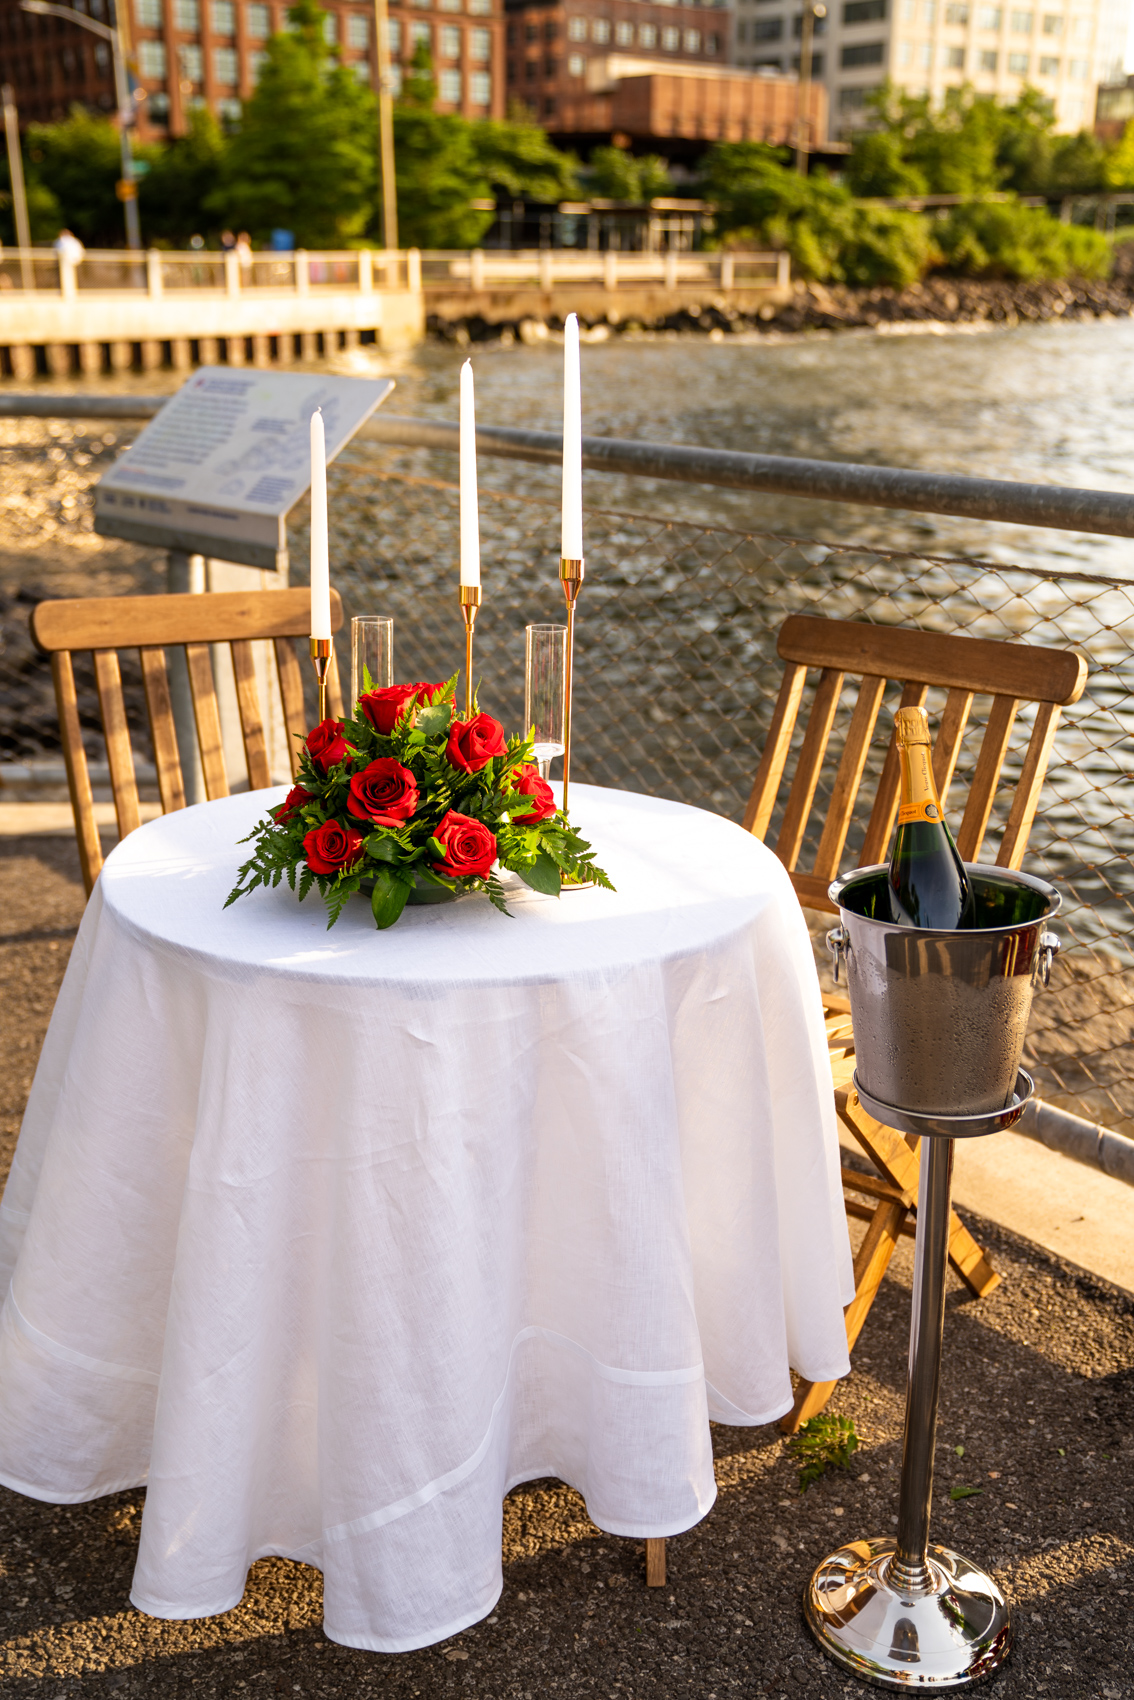 Romantic table for two | Proposal Ideas and Planning